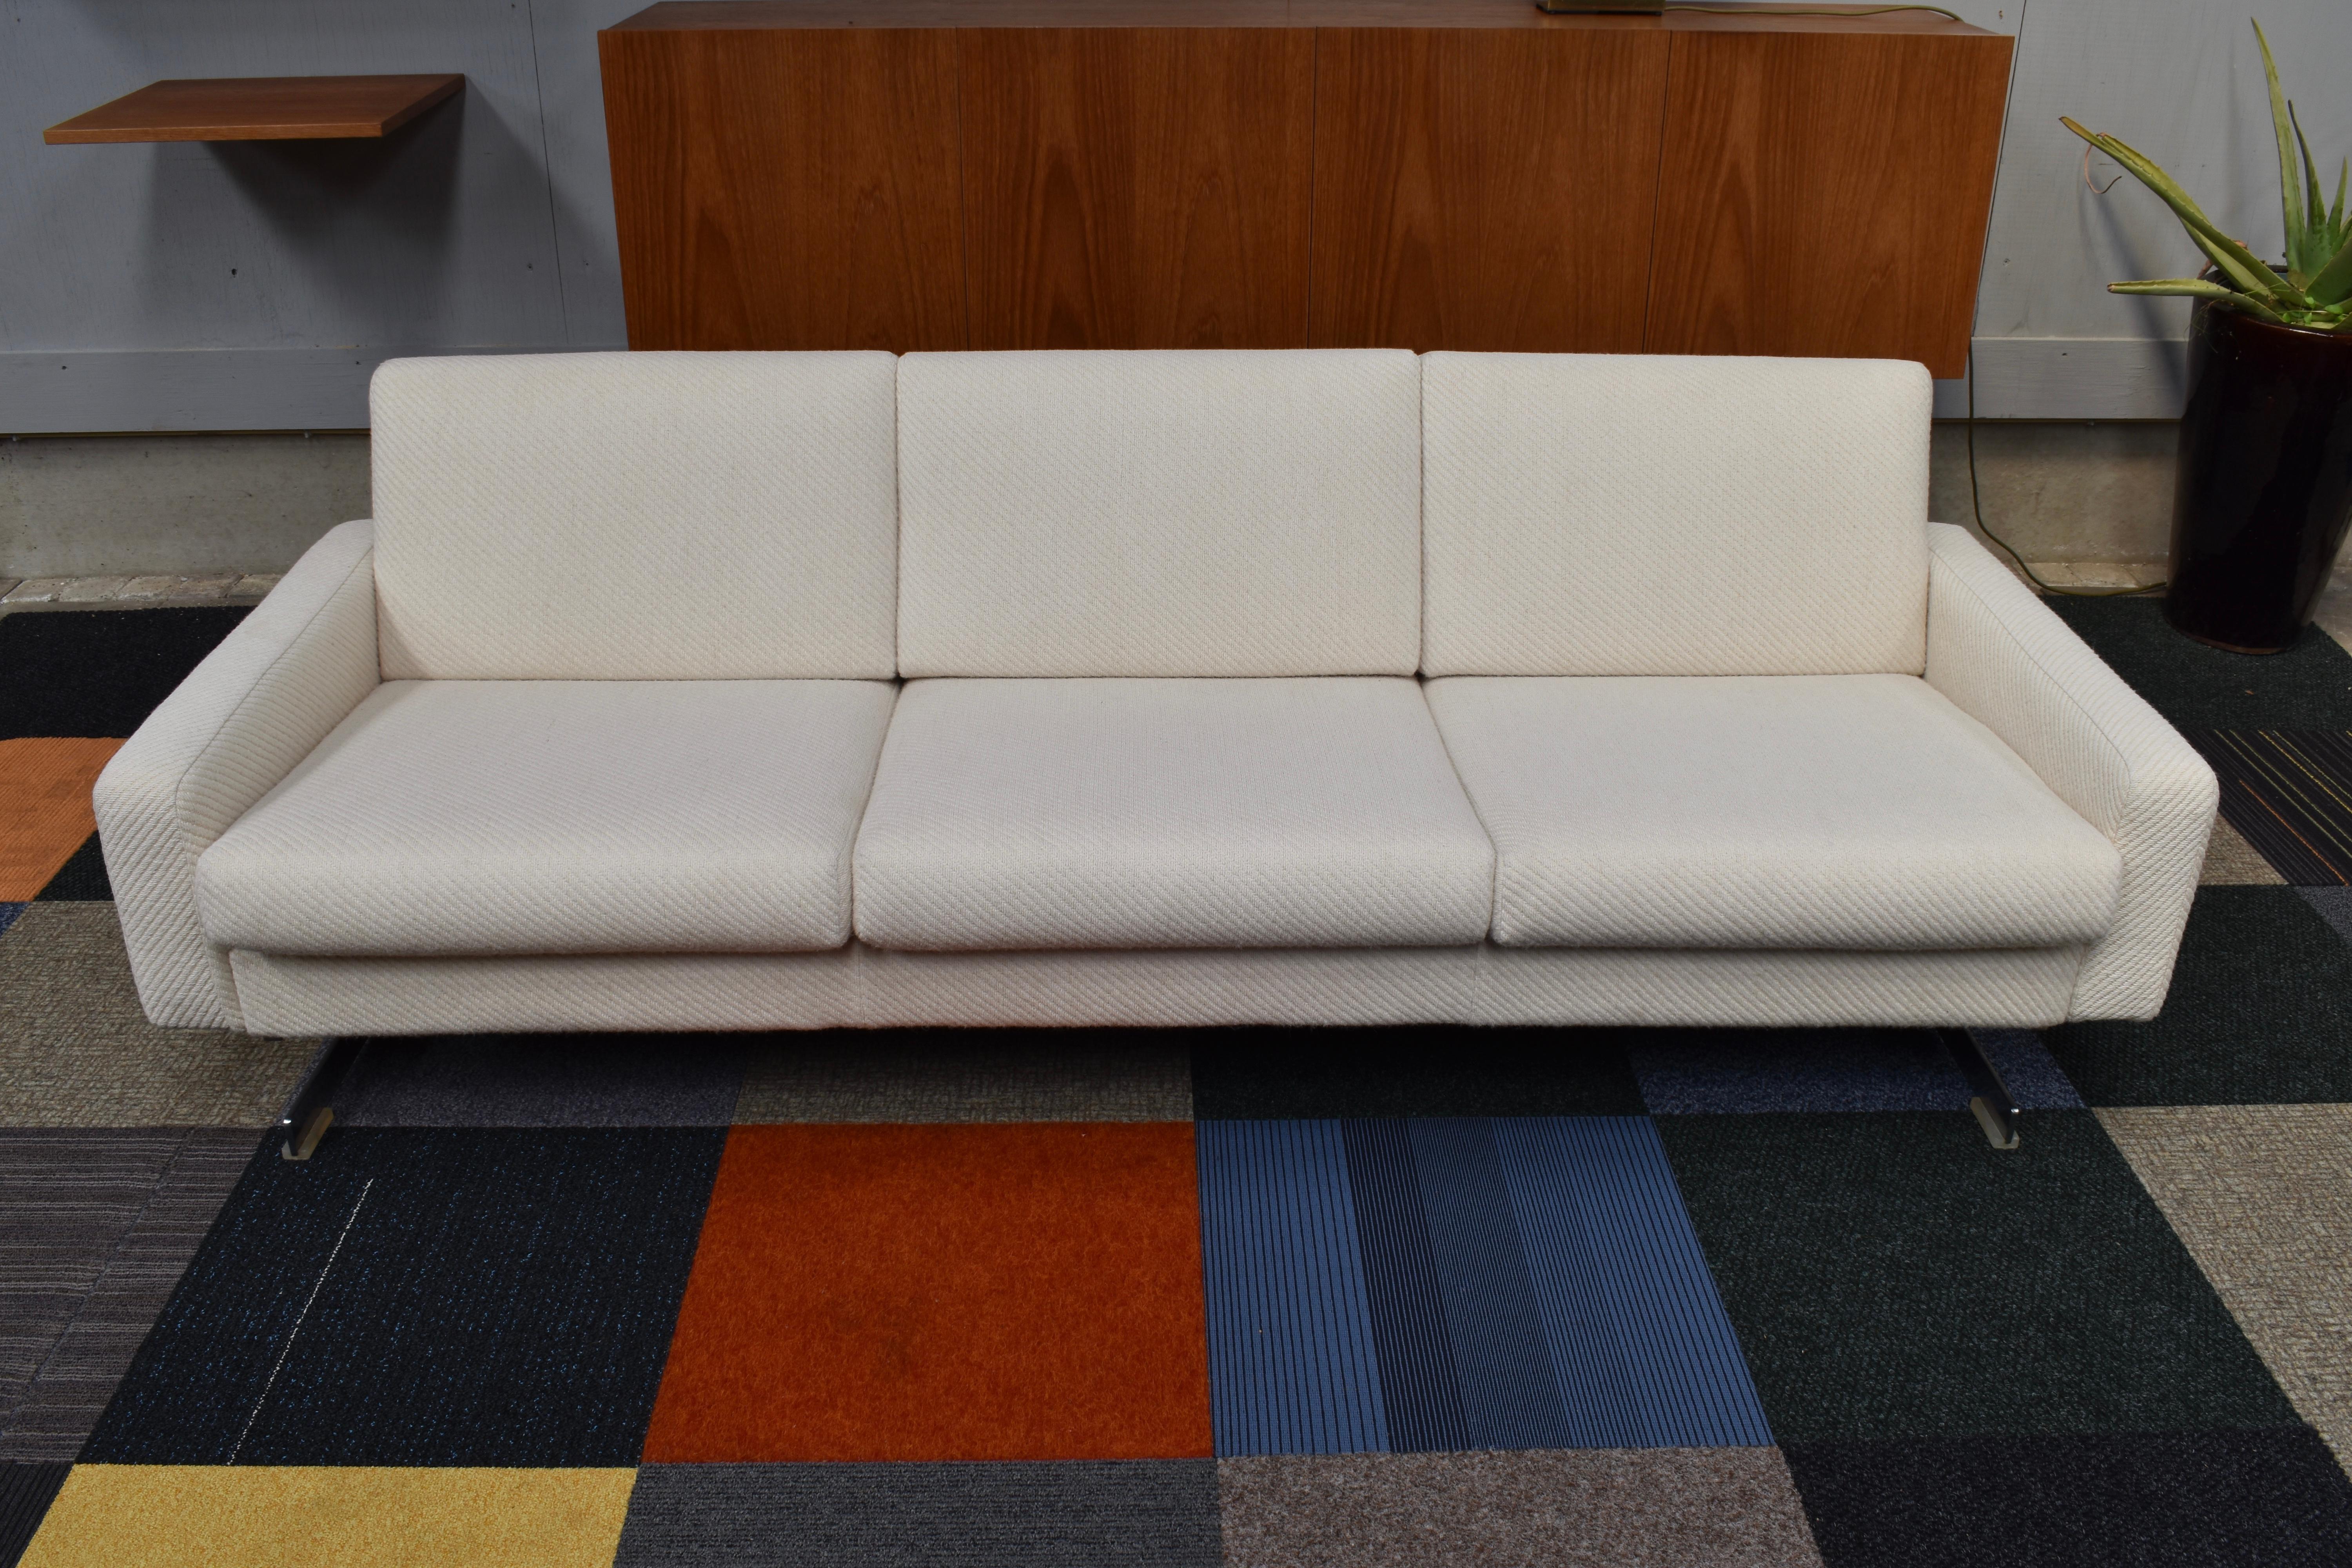 Very rare 1st edition pluraform sofa by Rolf Benz. 
The sofa still has beautiful original fabric and is in very good original condition. No stains, wear, tears or holes. Some discoloration on parts that are covered (where the seat cushions shove